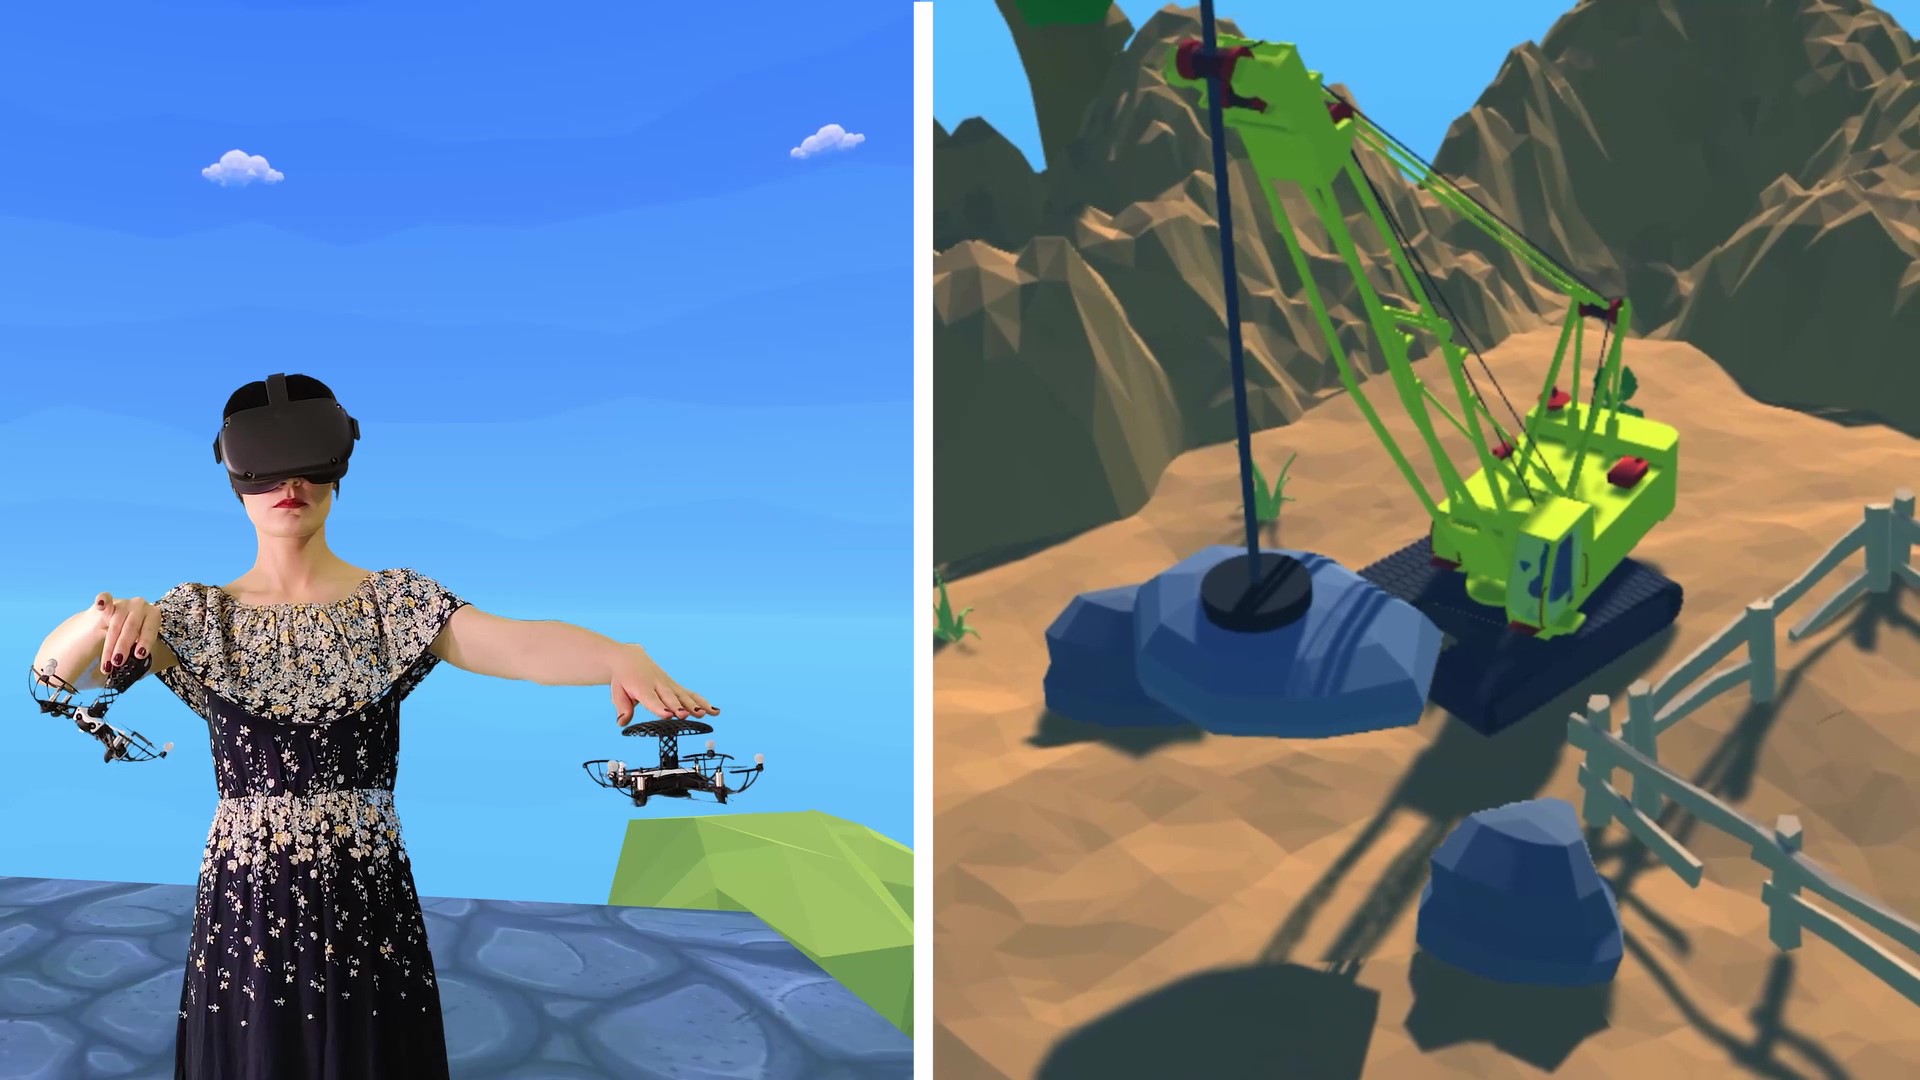 Screenshot from the video. On the left, a person with flying controllers. On the right, the crane she sees in the virtual world.